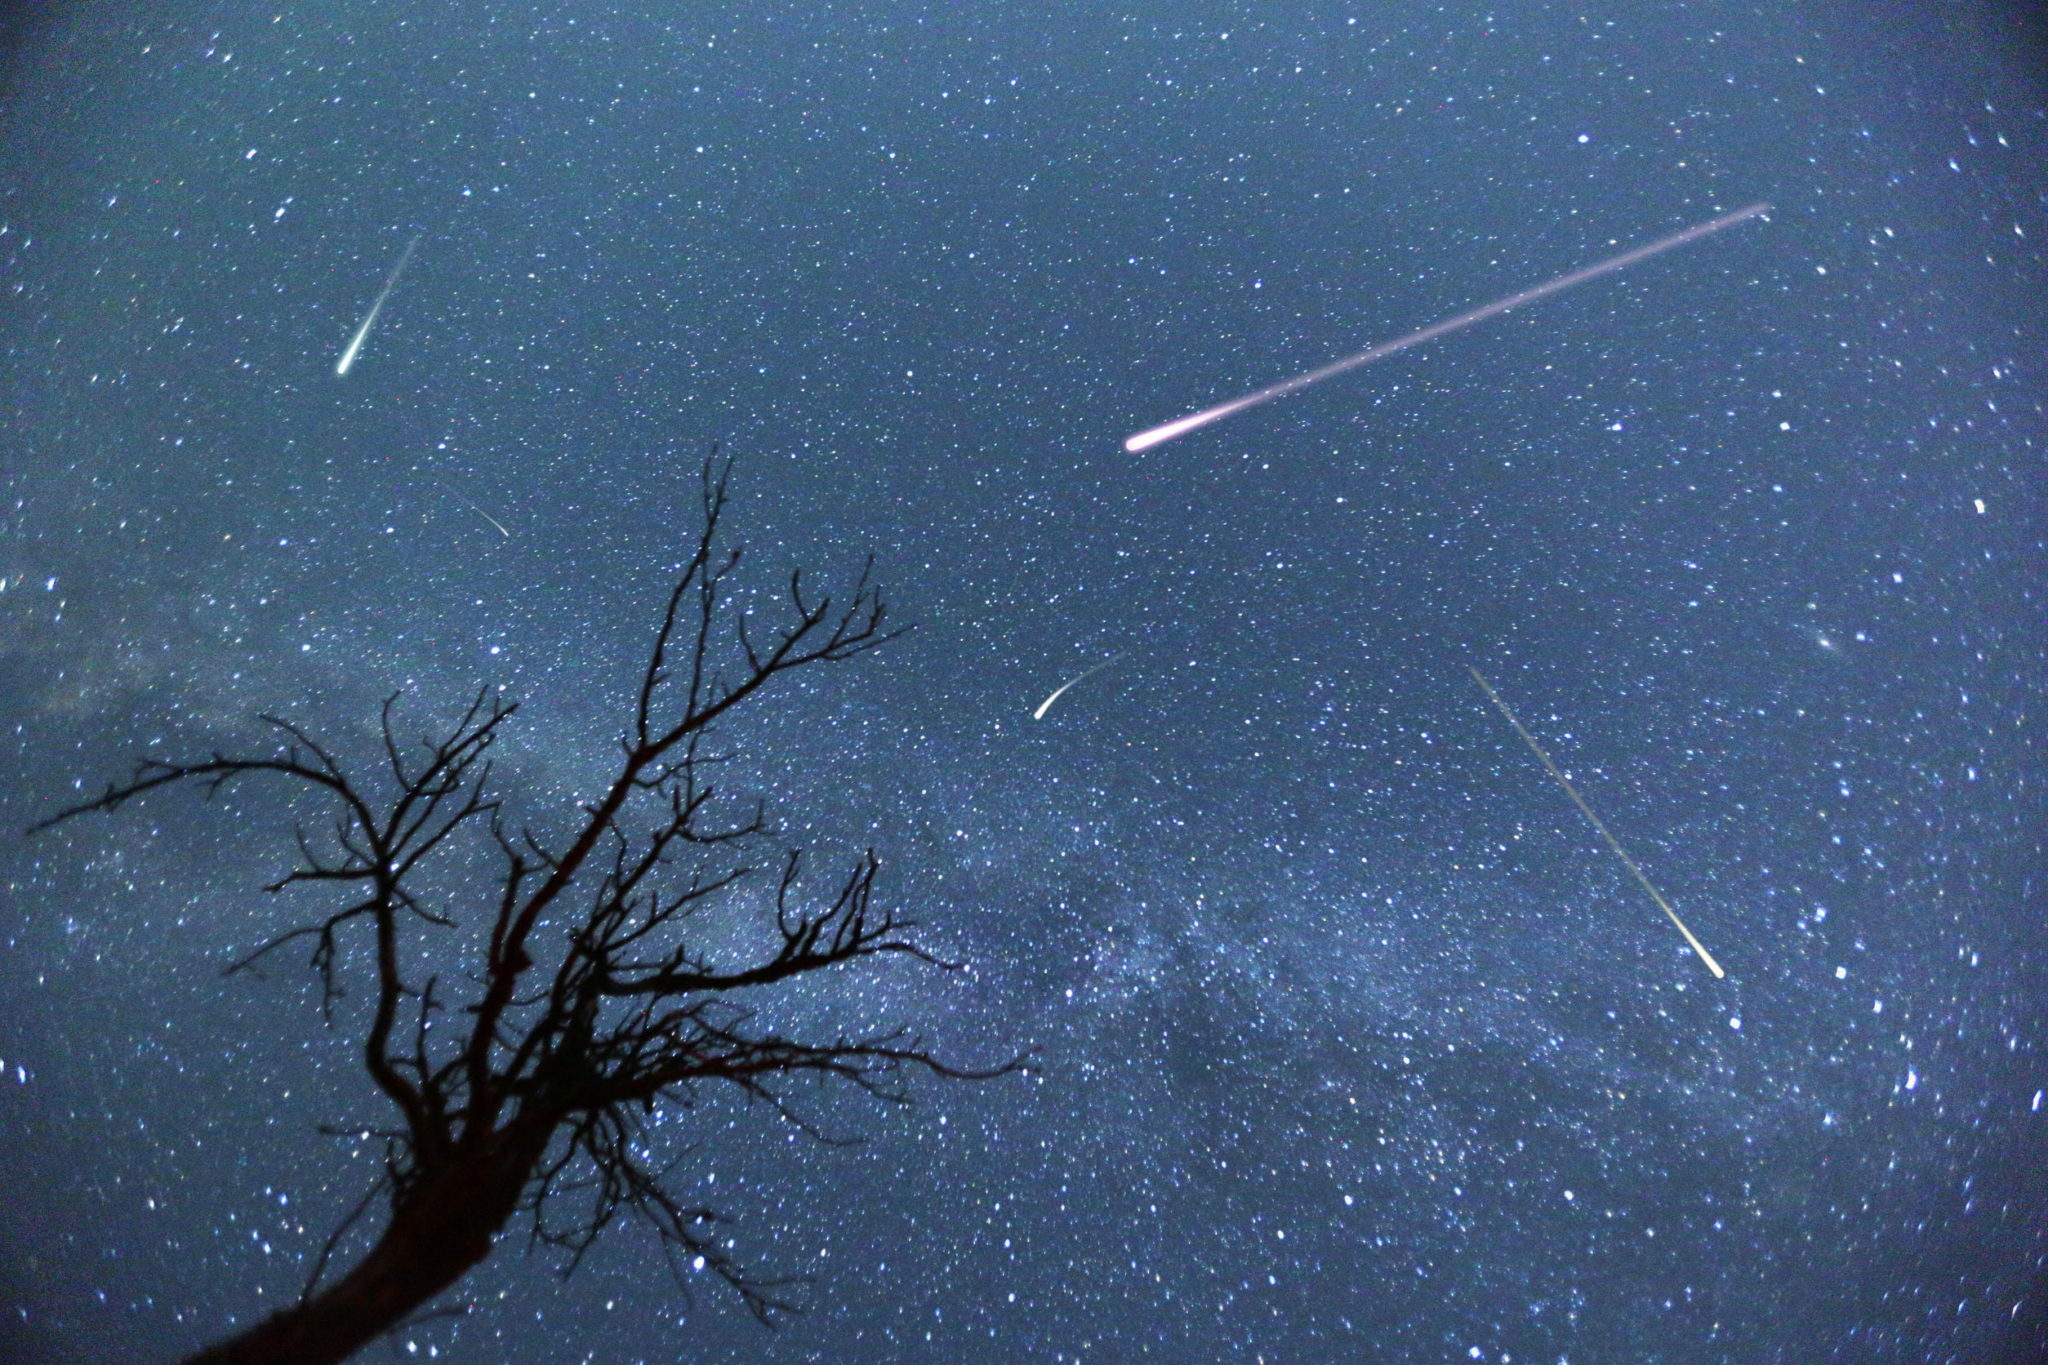 Take Advantage of your Last Chance to see the Perseid Meteor Shower